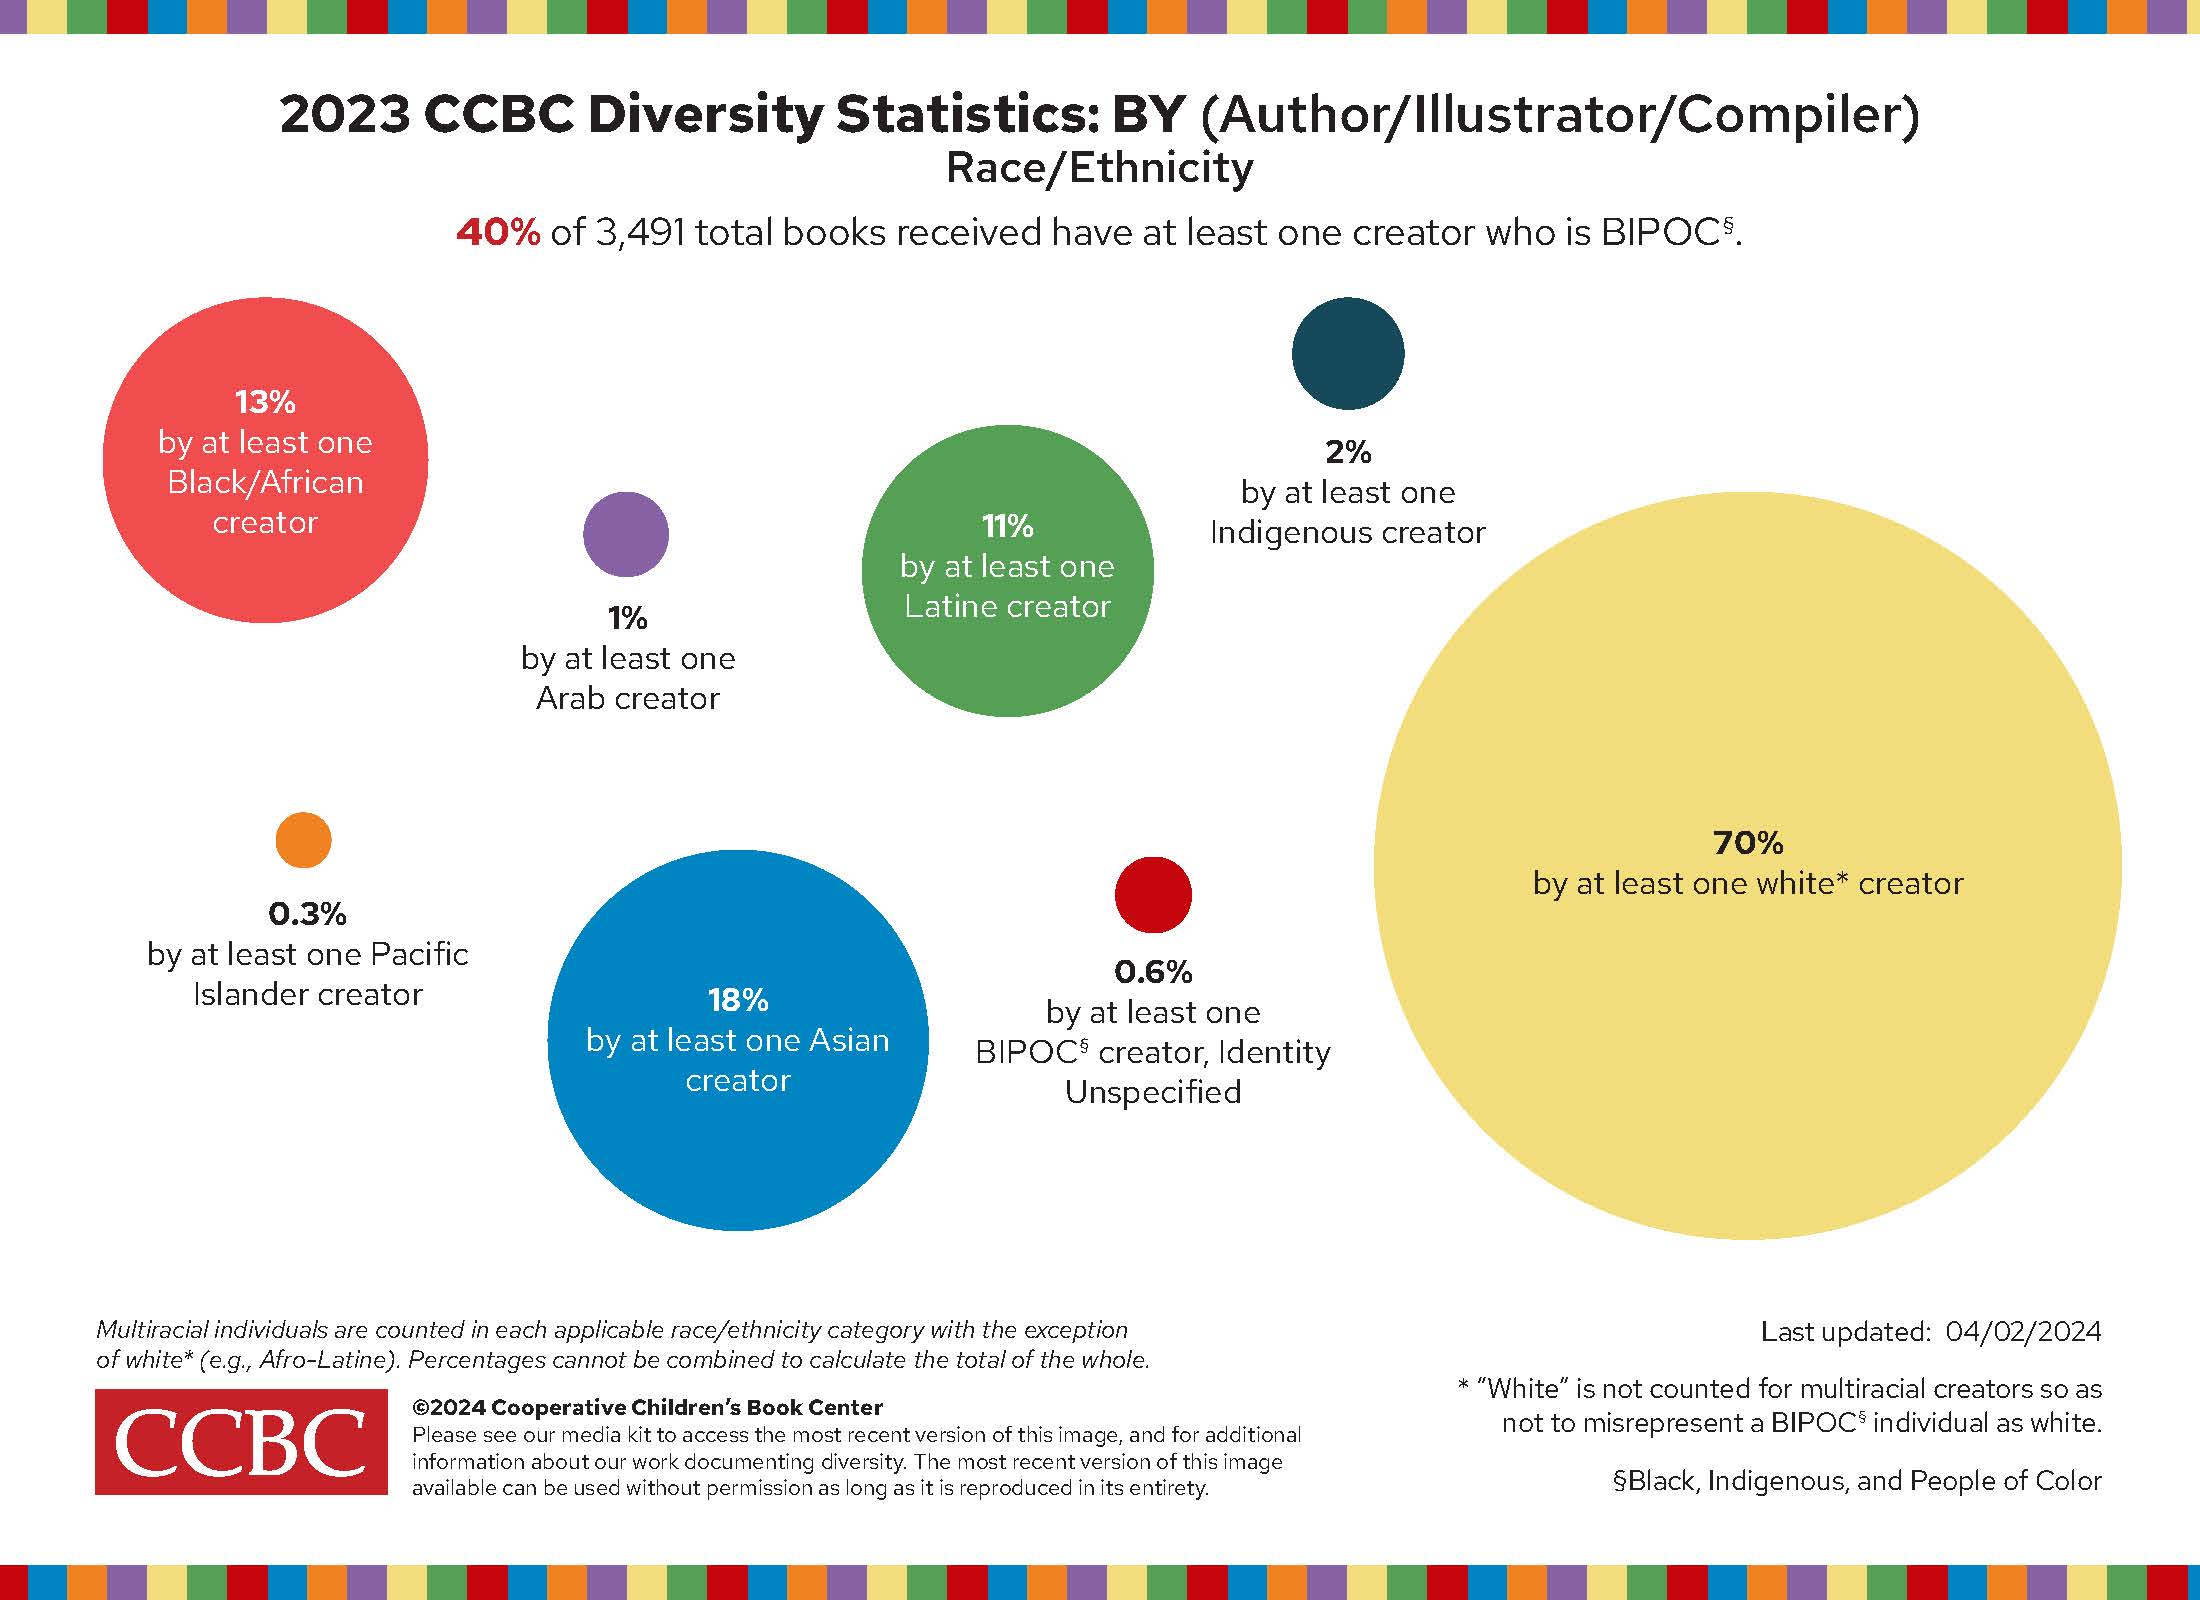 BIPOC Representation in Children's Literatures Continues Its Slow Rise, According to CCBC's Diversity Statistics